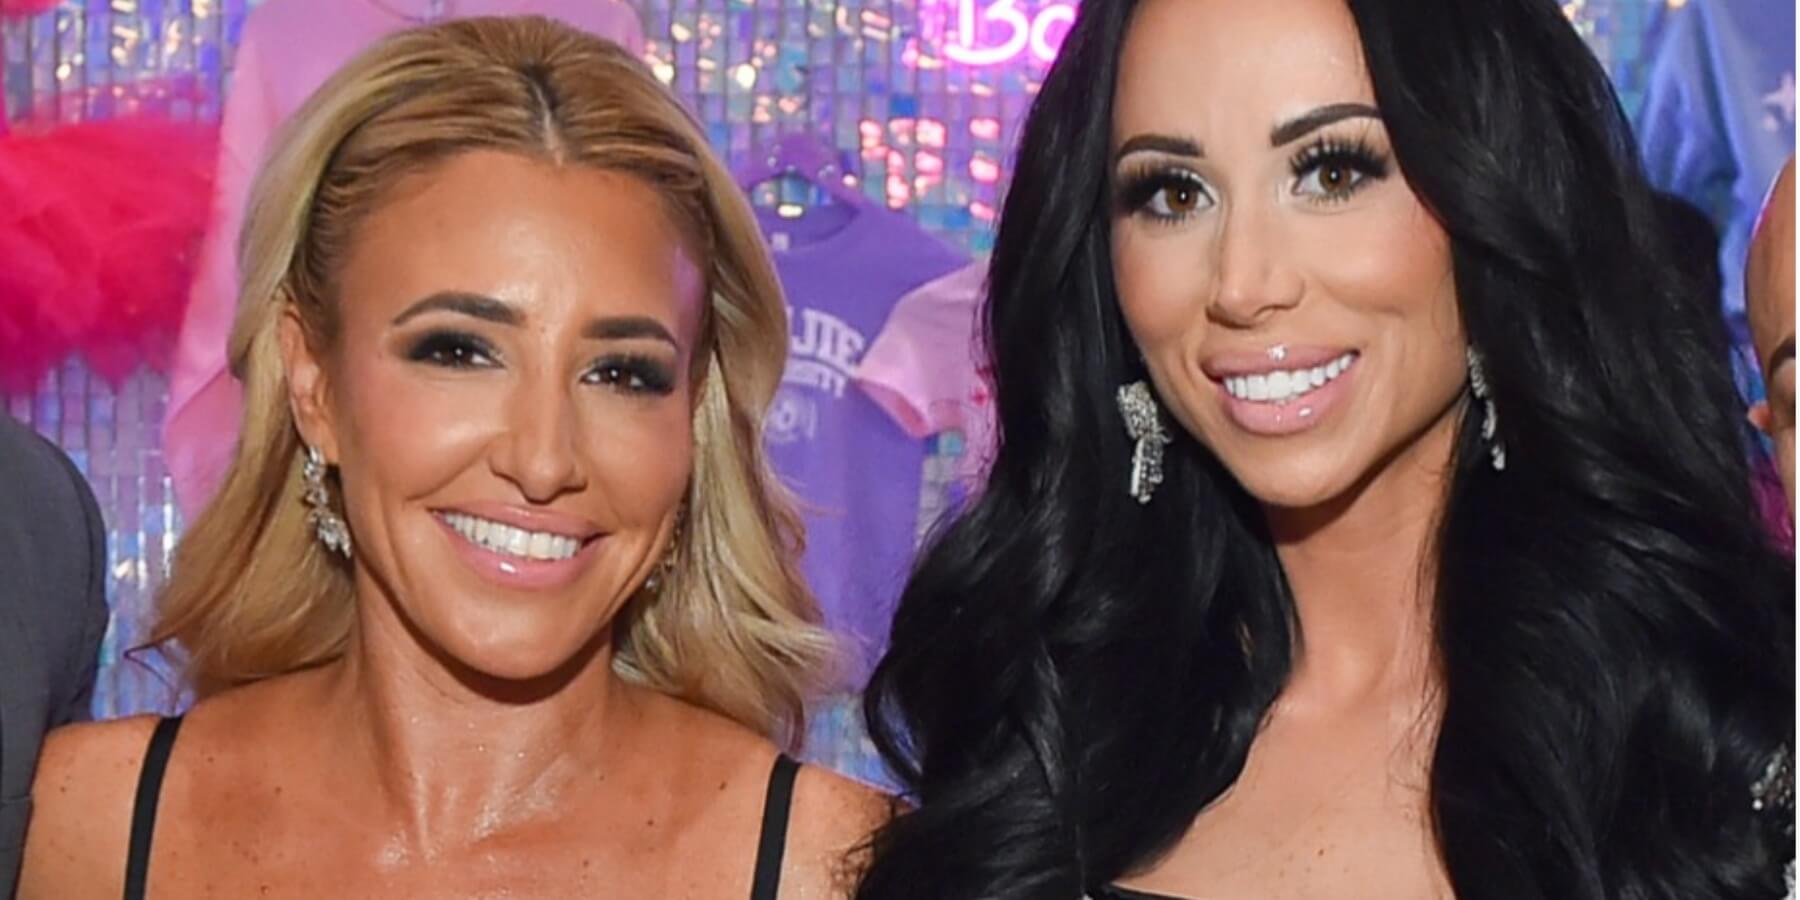 Danielle Cabral and Rachel Fuda are part of the cast of 'Real Housewives of New Jersey.'